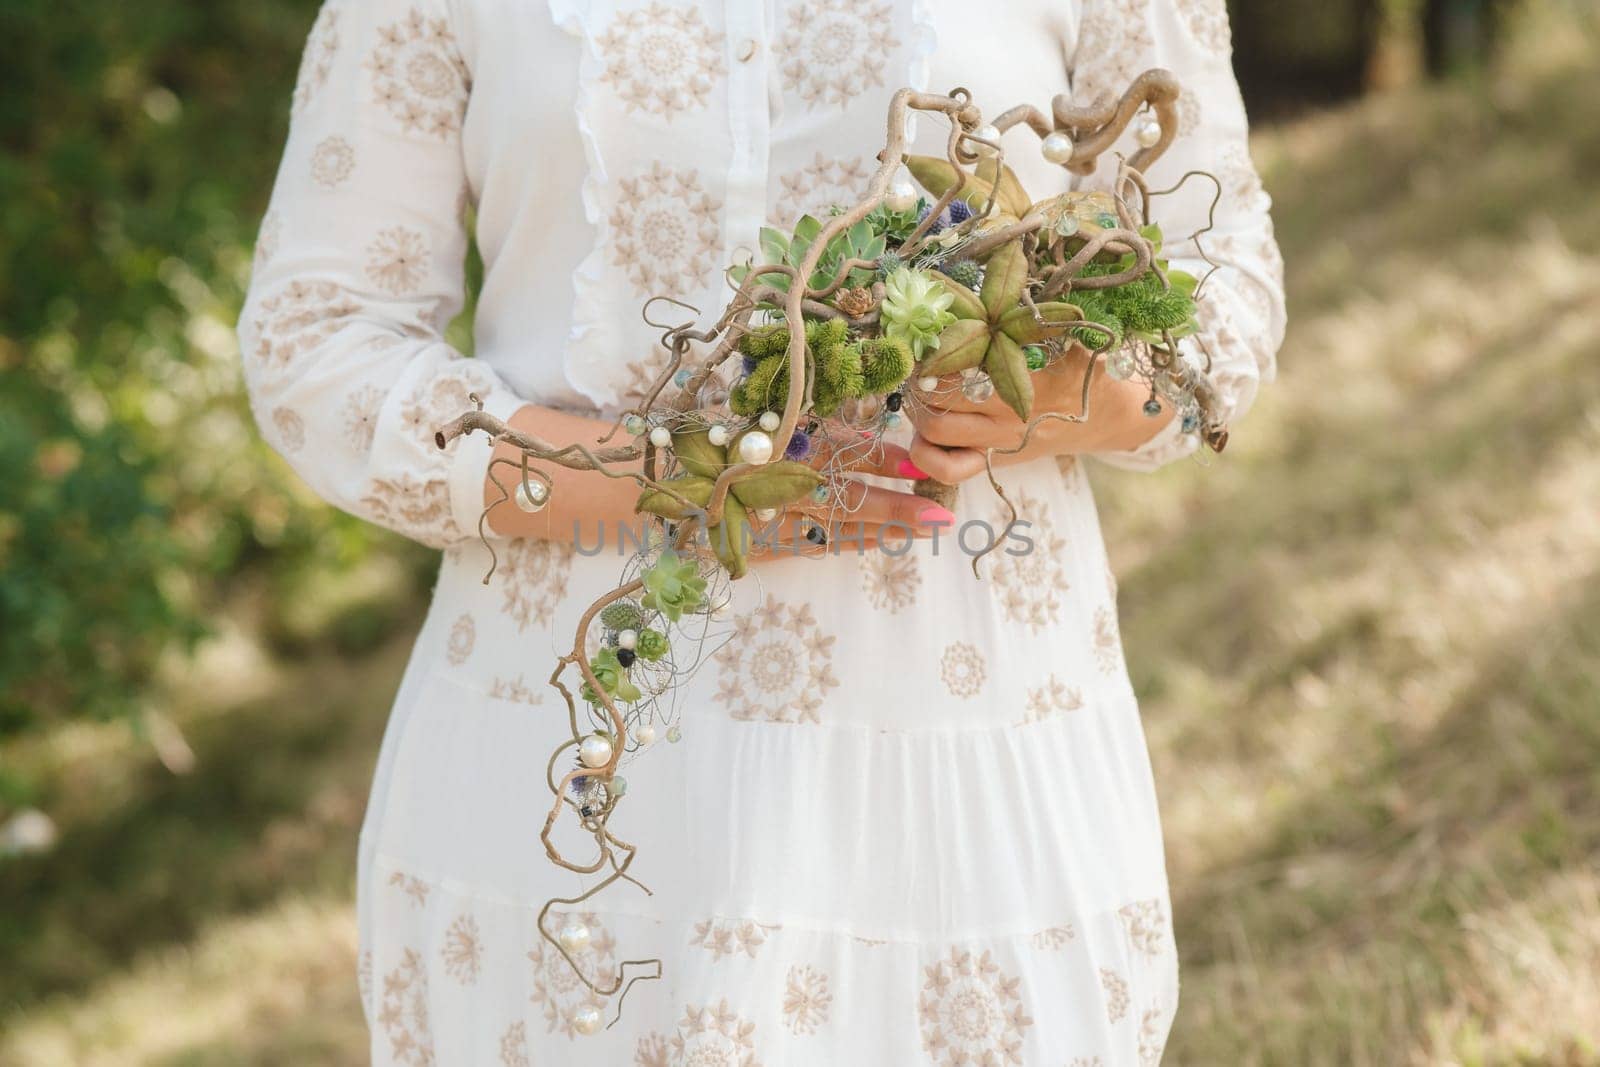 The bride holds an unusual braided wedding bouquet in her hands.